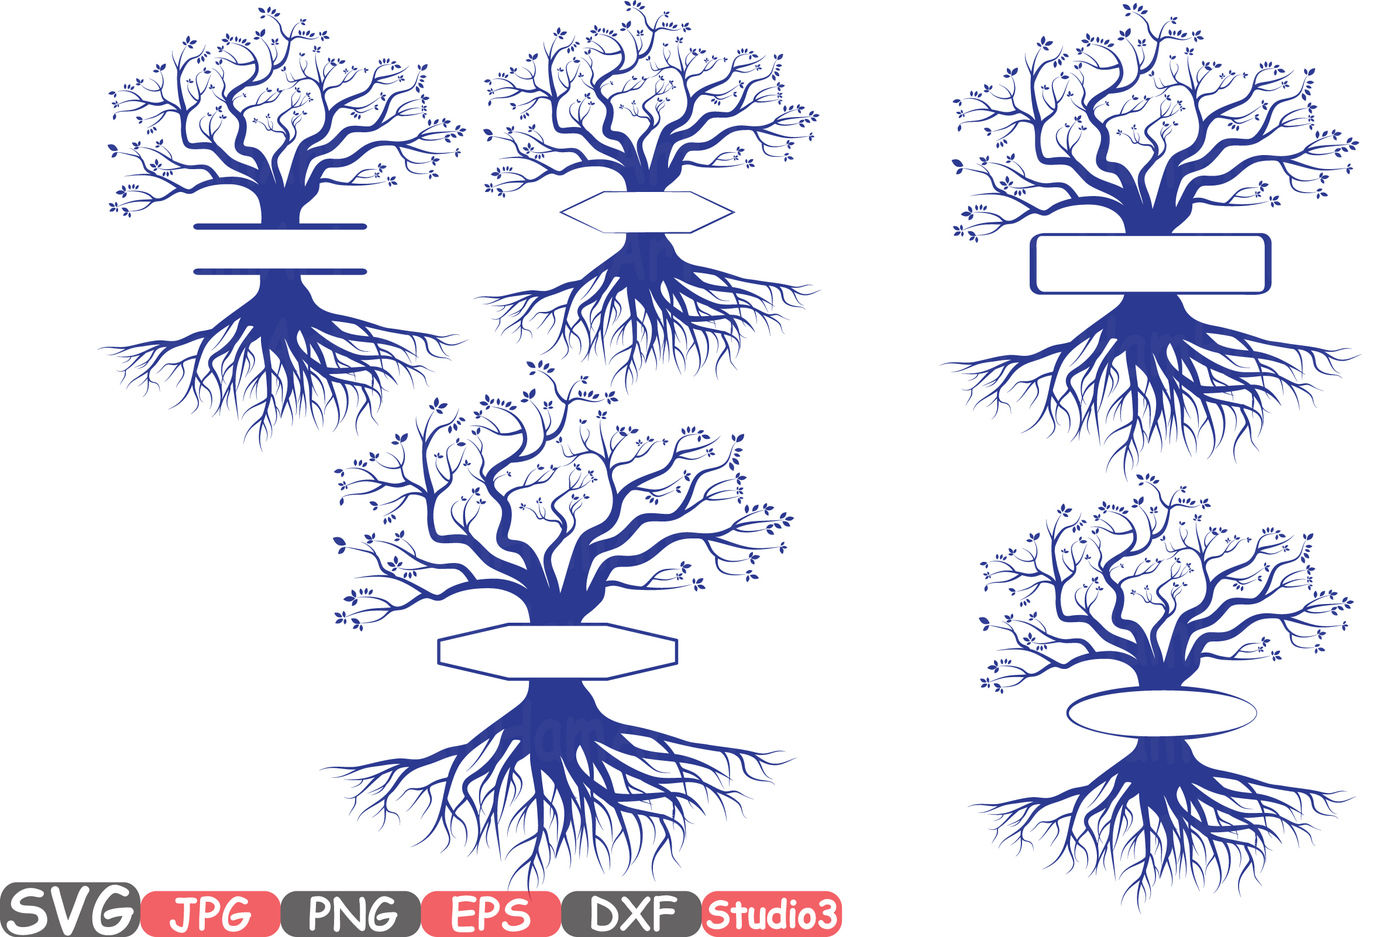 Download Split Family tree SVG Word Art Cutting Files Family Tree ...